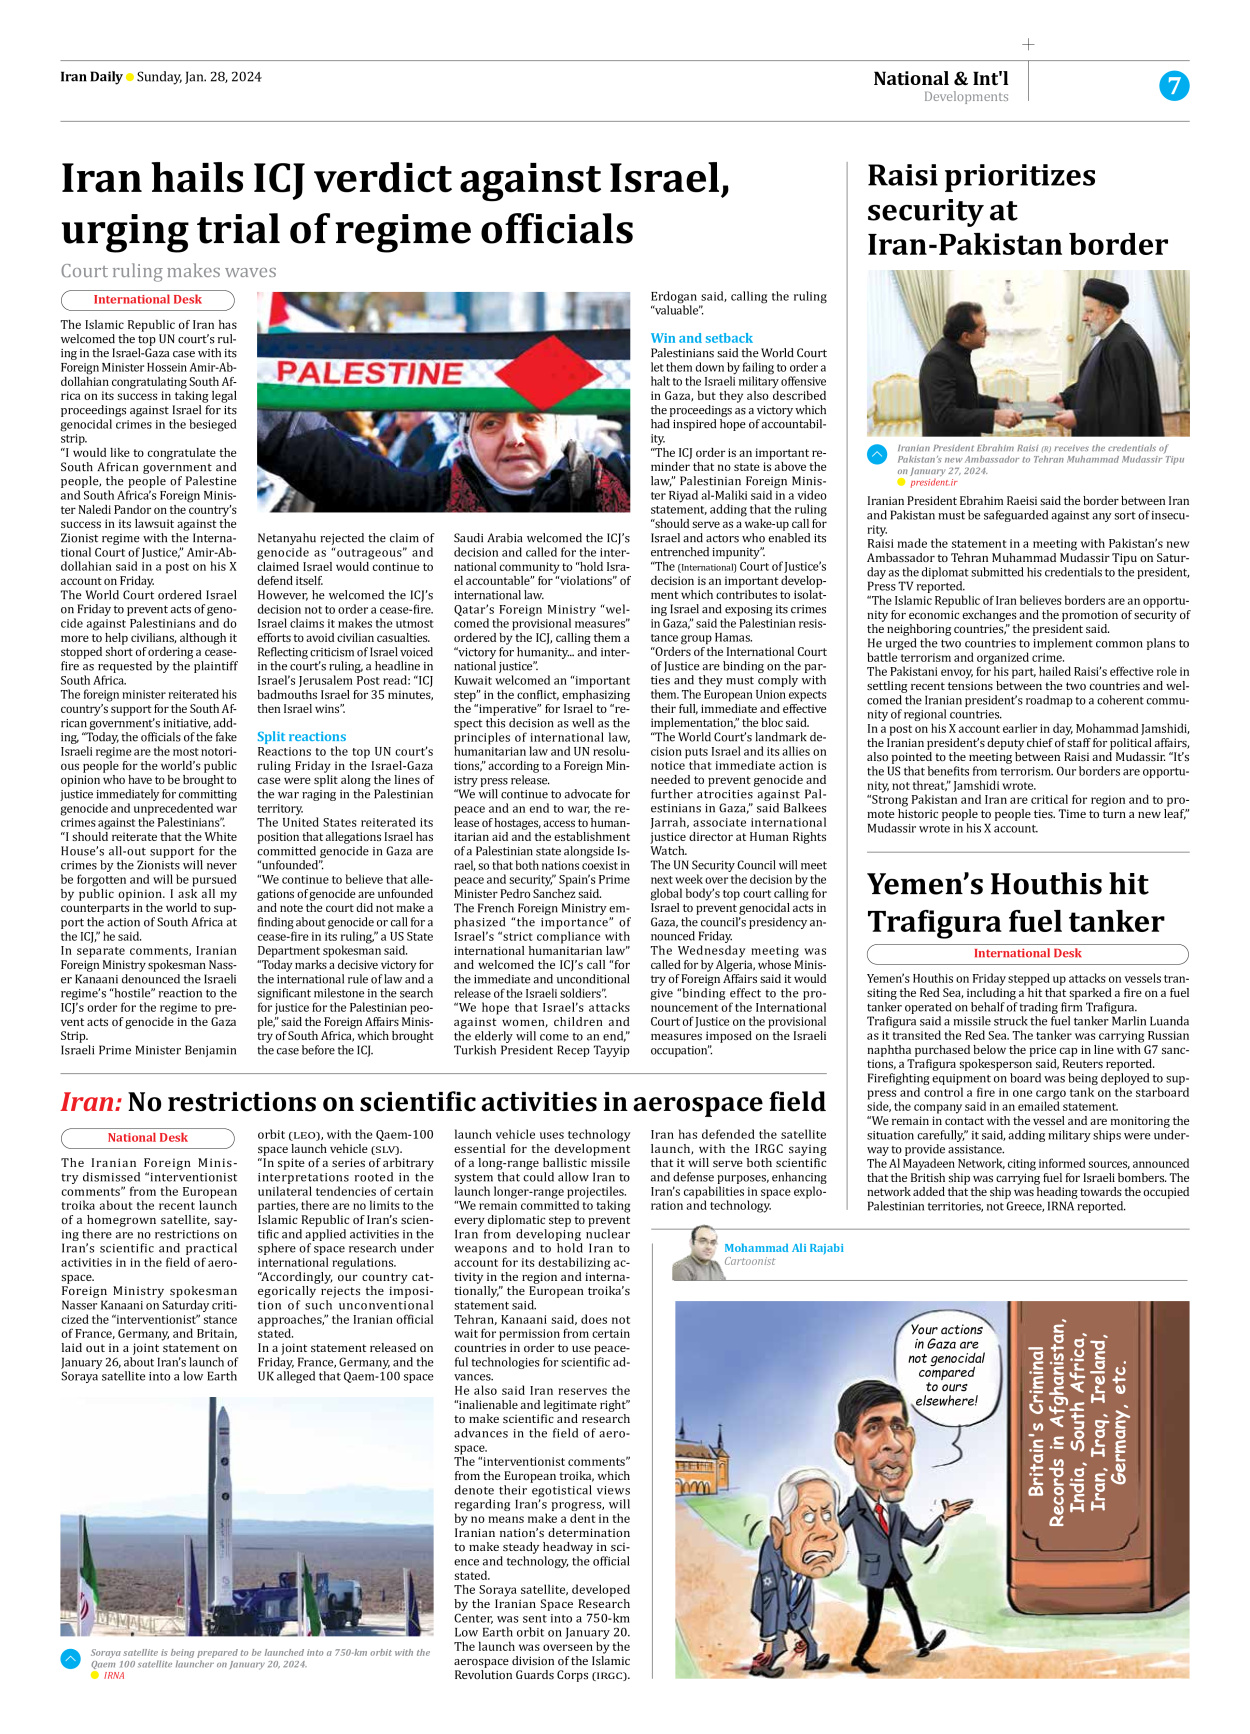 Iran Daily - Number Seven Thousand Four Hundred and Ninety Five - 28 January 2024 - Page 7